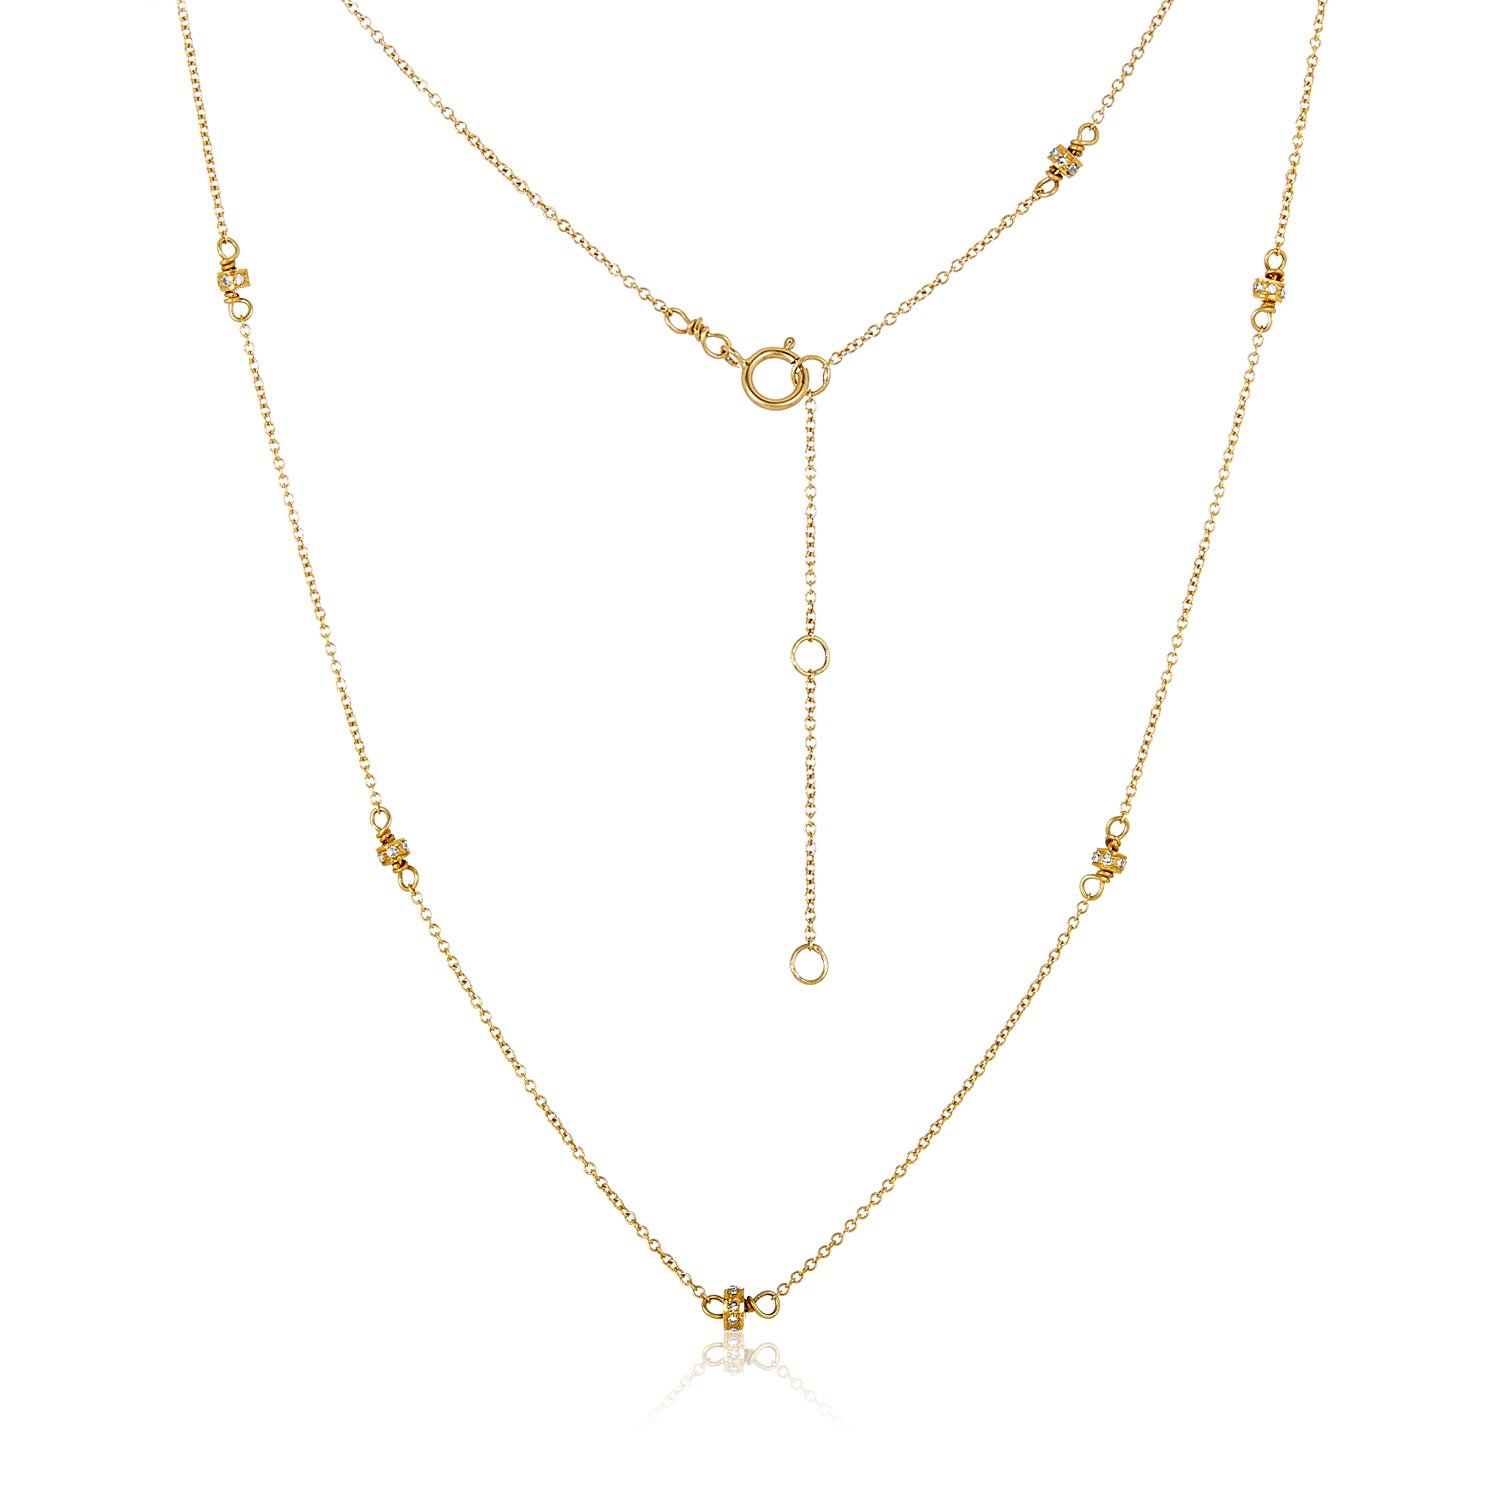 Diamond Barrel Section Necklace in 18k